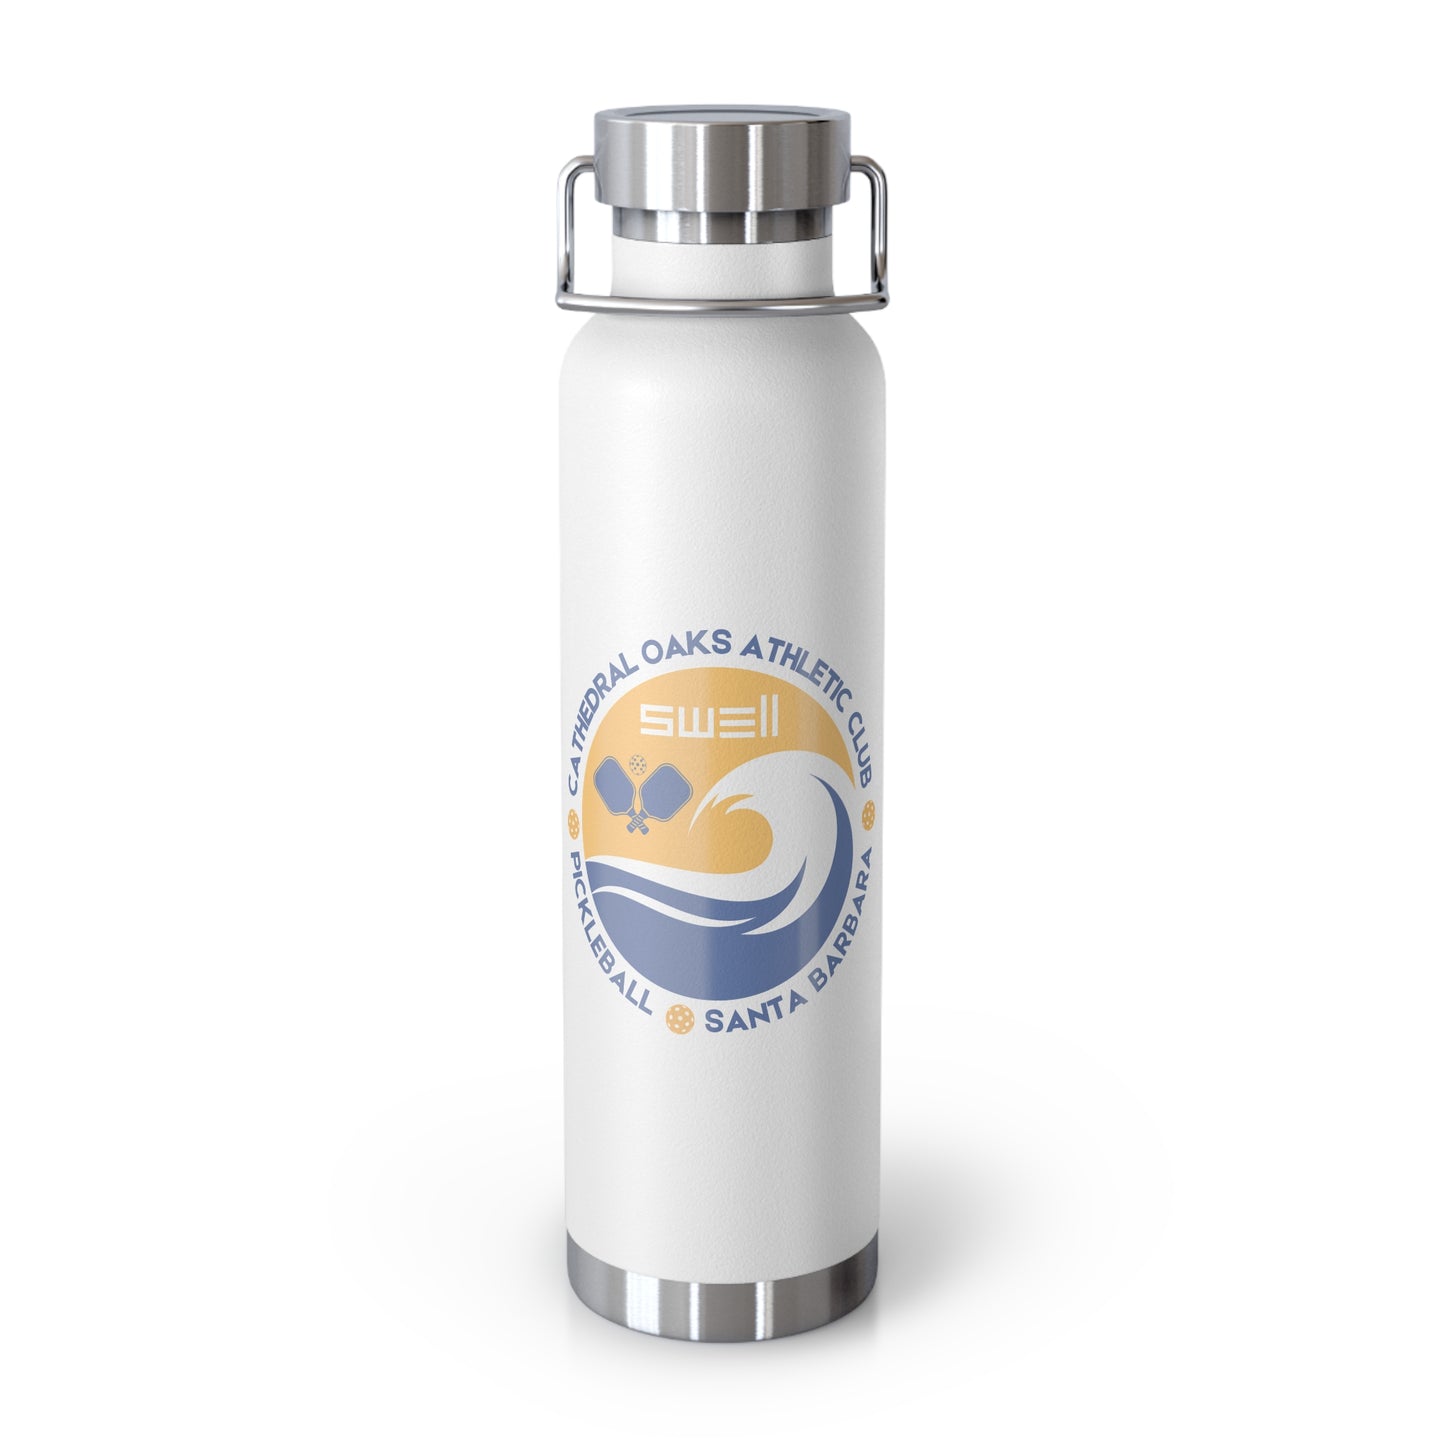 Cathedral Oaks - SWELL - PIckleball - Copper Vacuum Insulated Bottle, 22oz